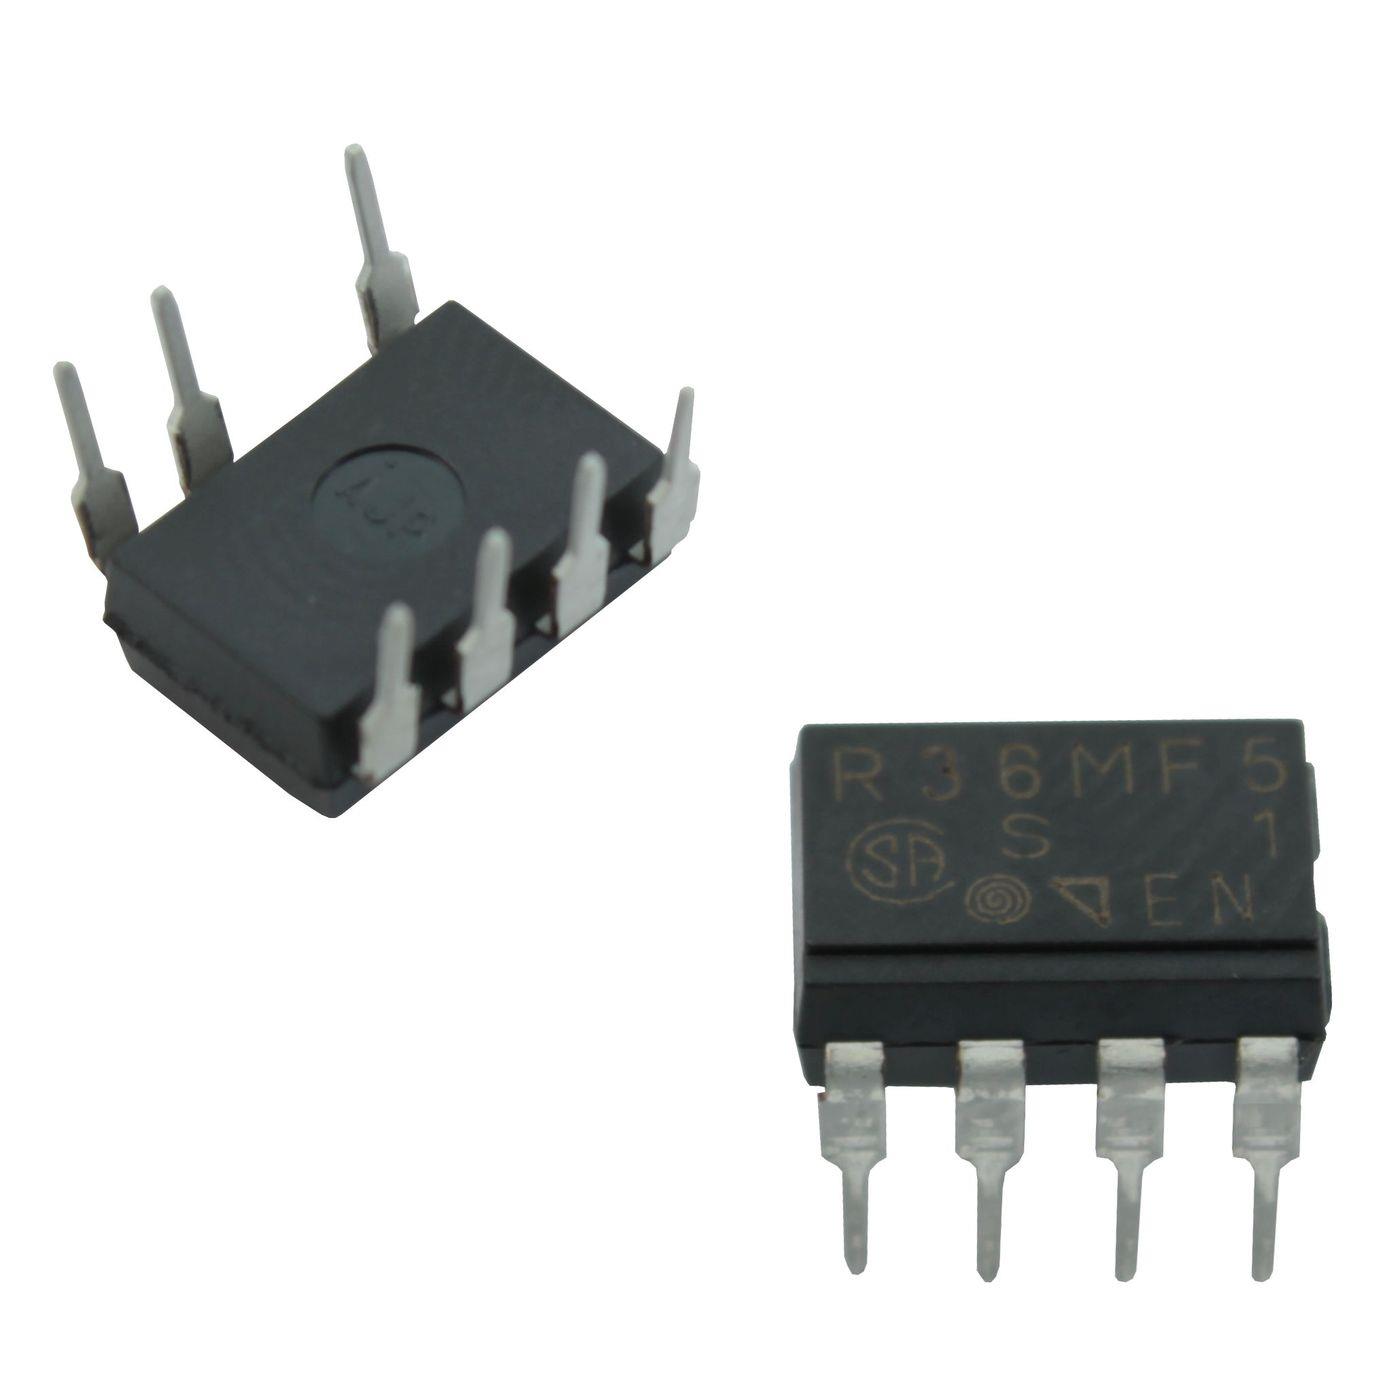 Solid-State-Relais IC Sharp PR36MF51NSZ6 DIL-7 DIL-8